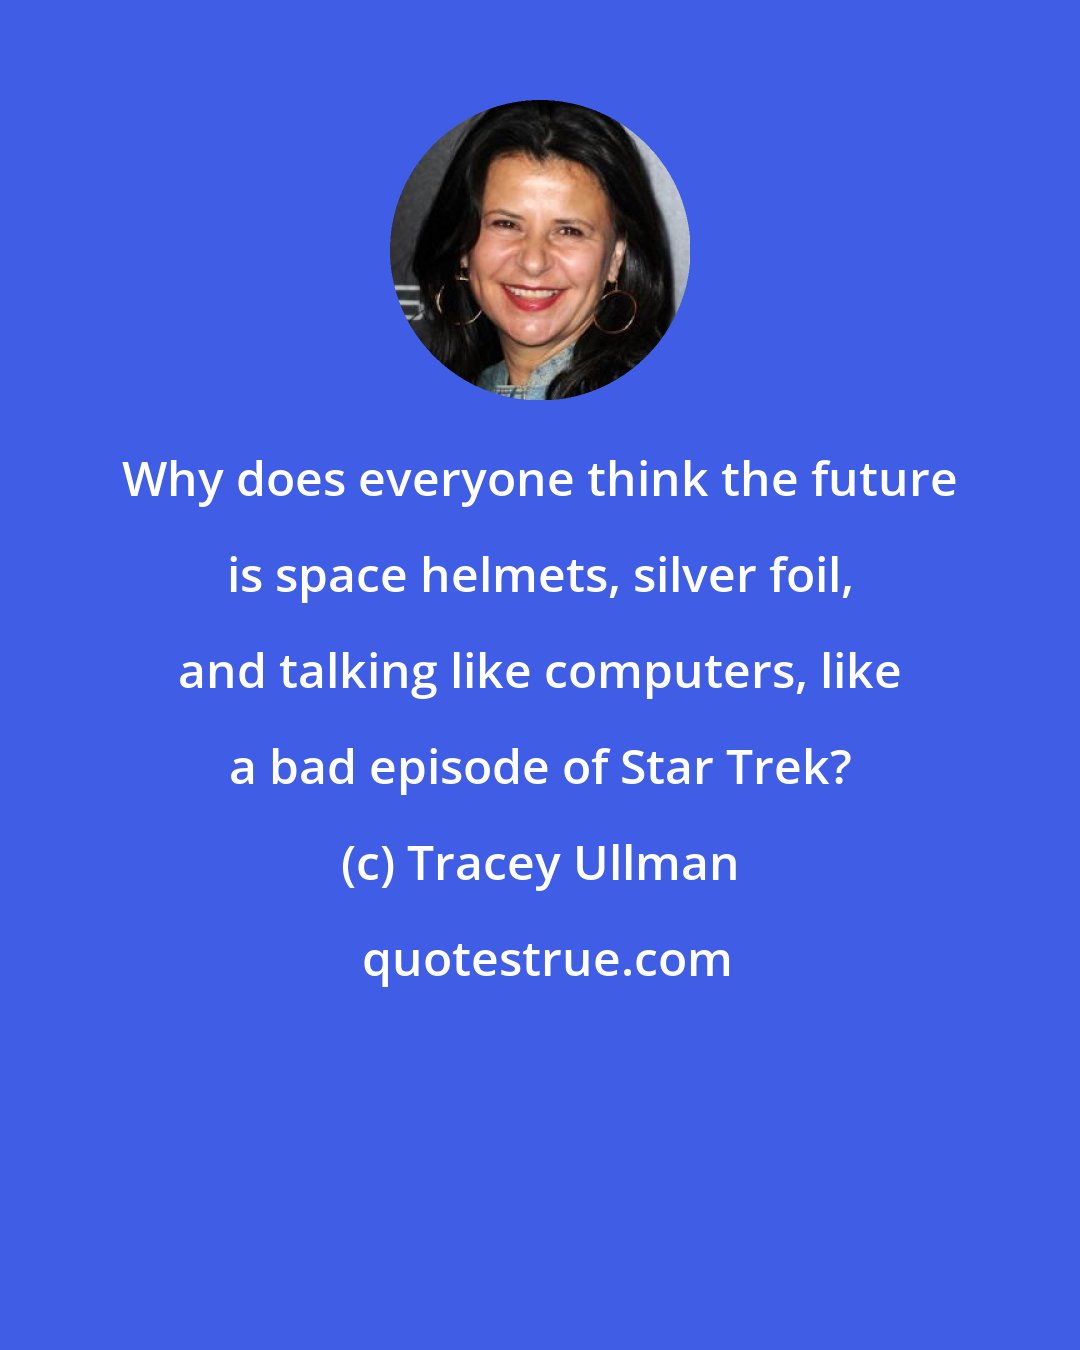 Tracey Ullman: Why does everyone think the future is space helmets, silver foil, and talking like computers, like a bad episode of Star Trek?